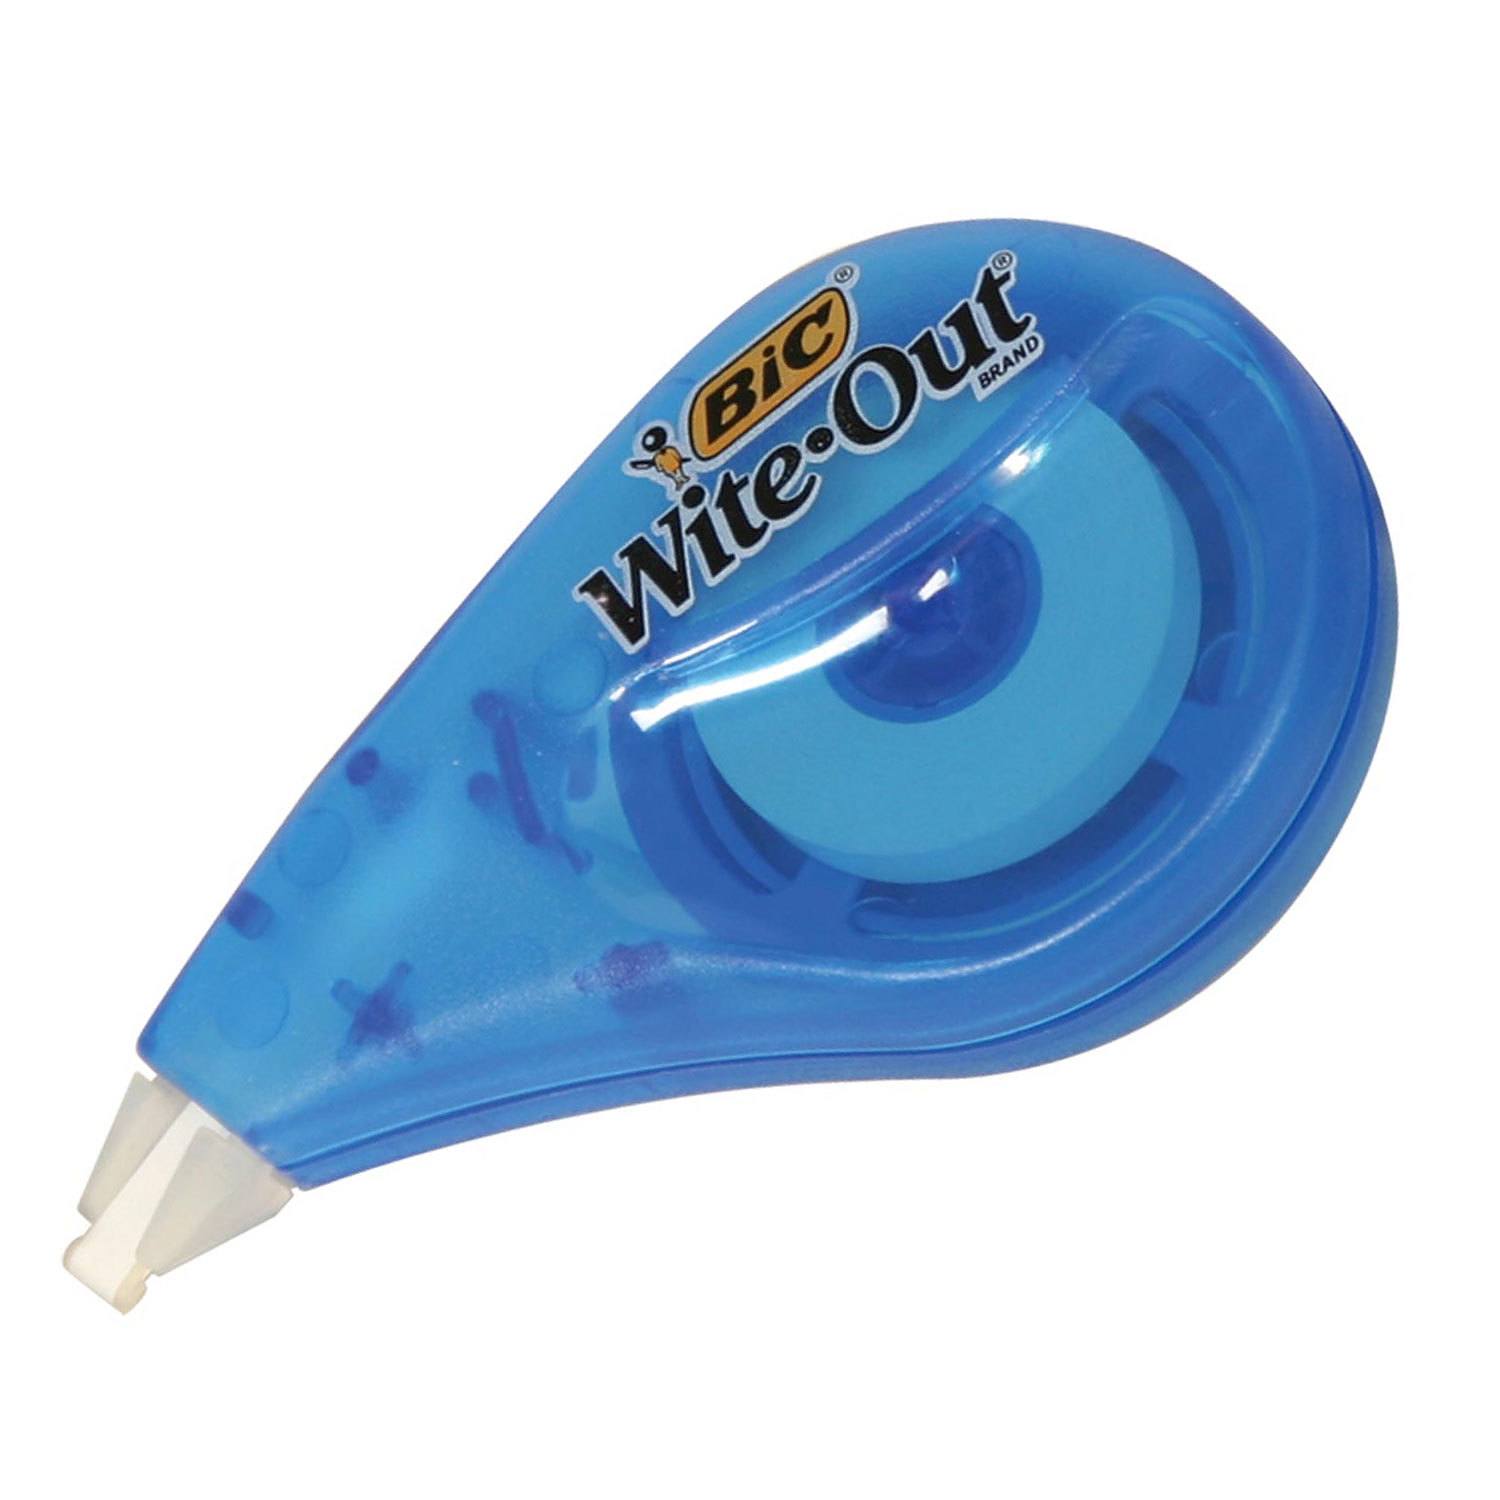 https://www.rossy.ca/media/A2W/products/bic-wite-out-ruban-correcteur-907-1.jpg